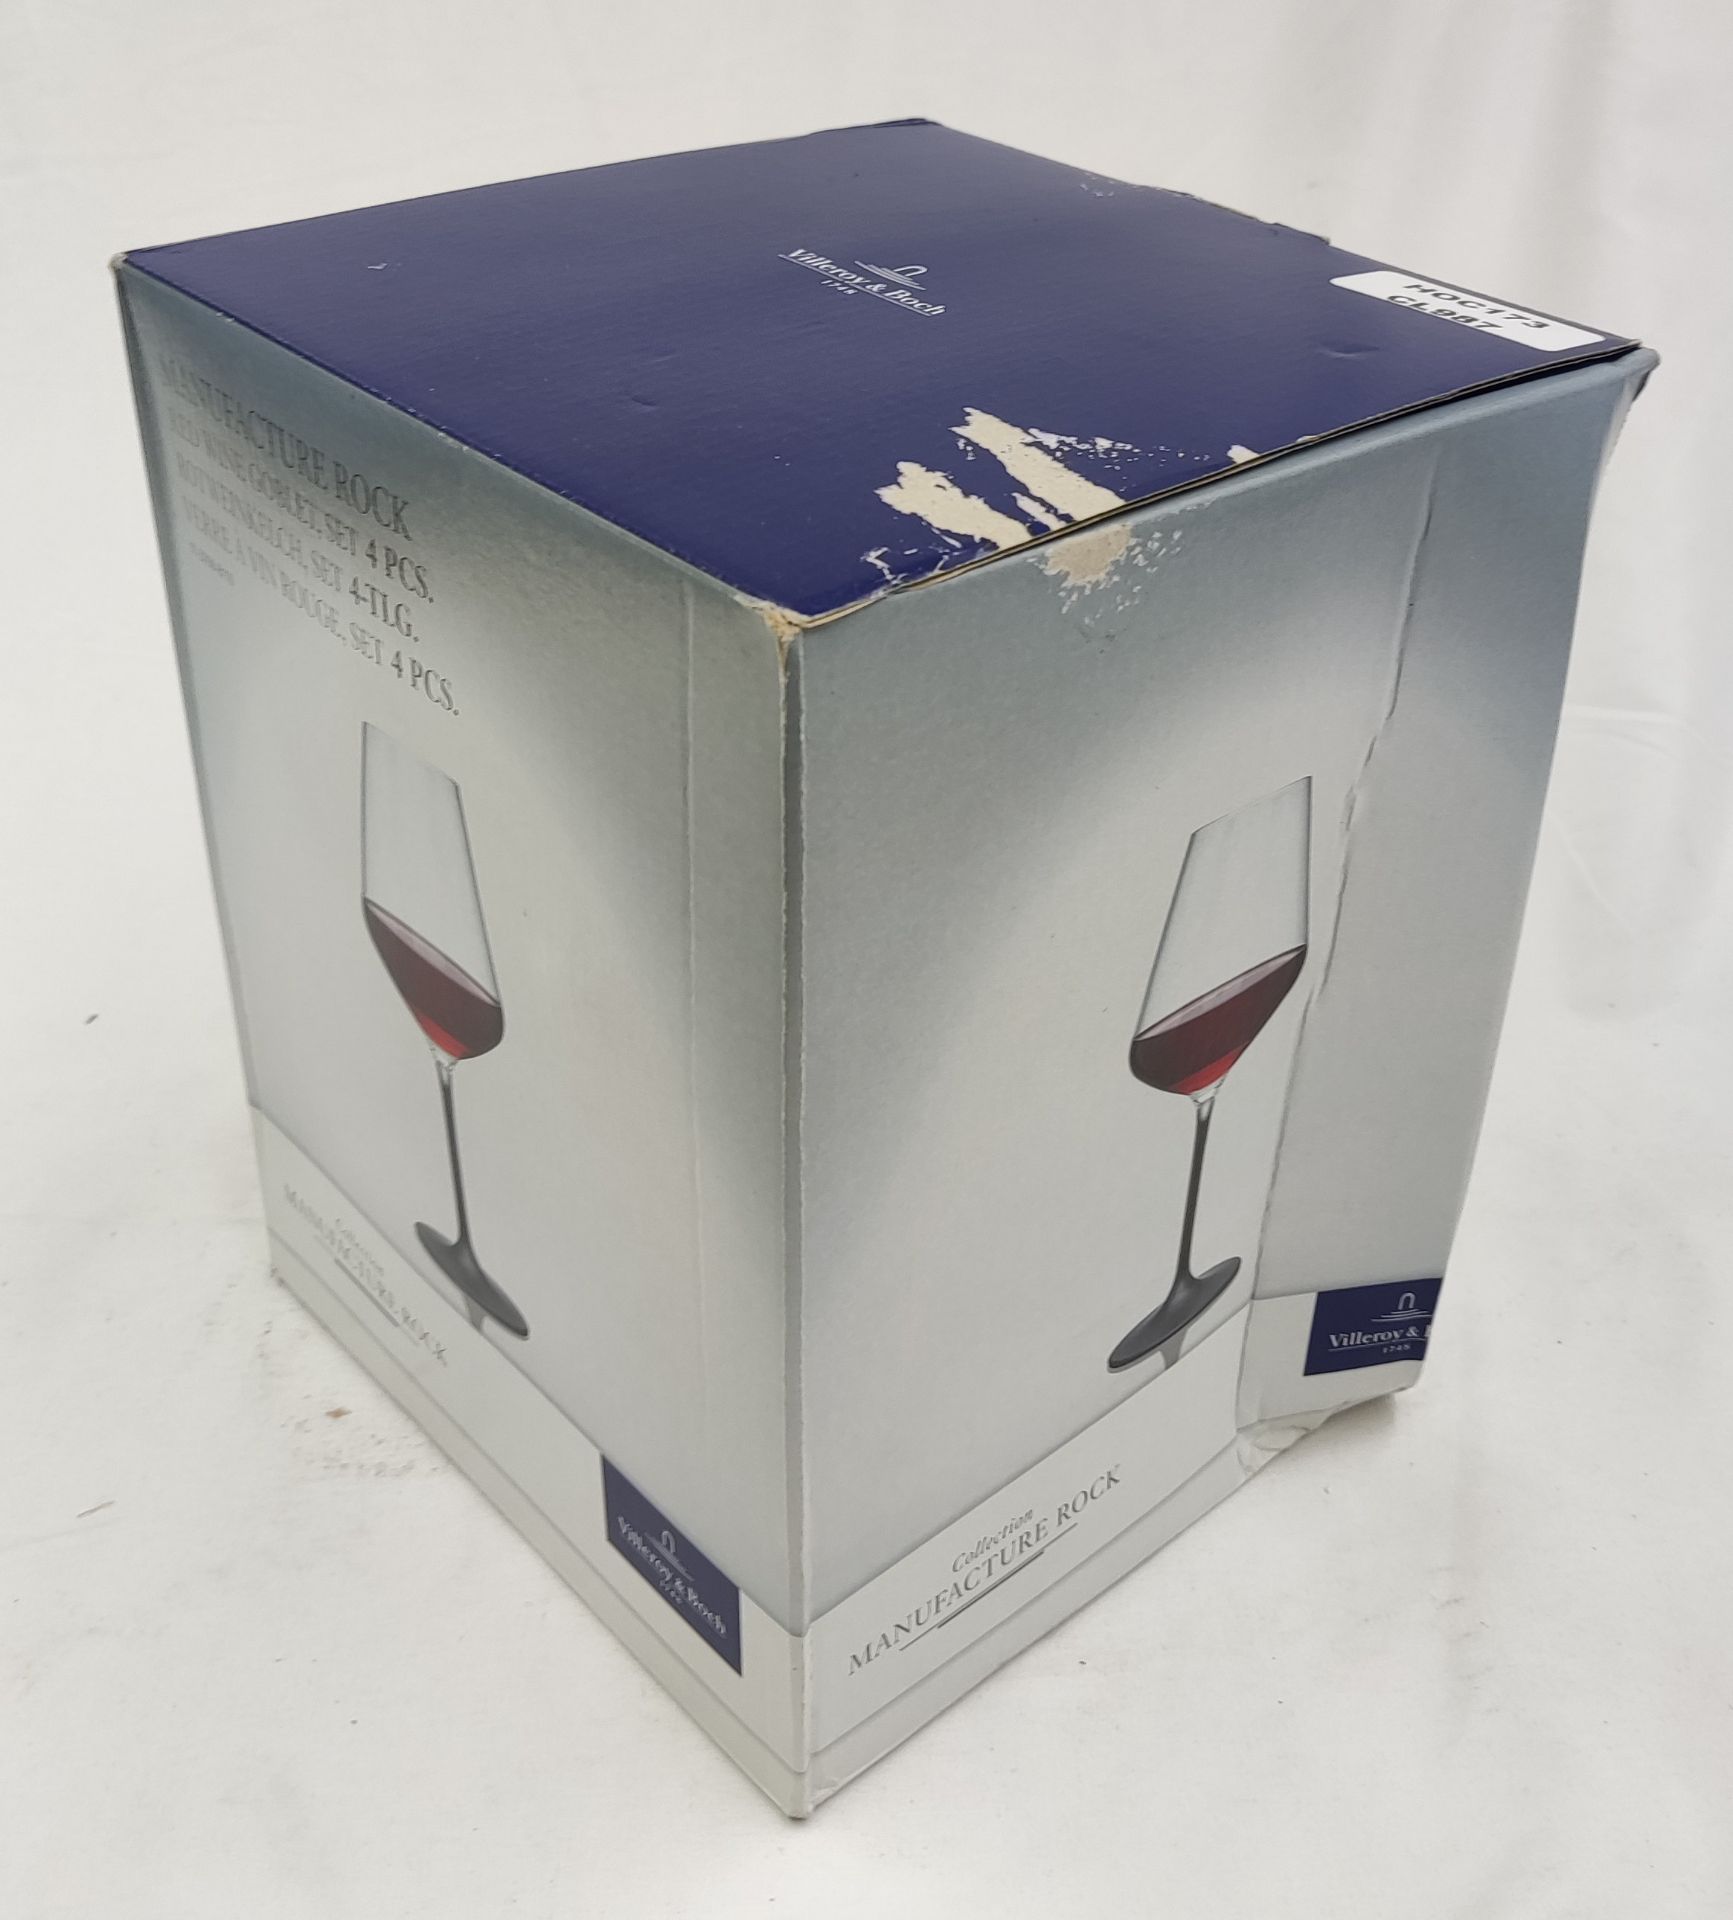 1 x VILLEROY & BOCH Manufacture Rock Red Wine Goblet Set, 4 Piece - New And Boxed - RRP £66 - Ref: - Image 5 of 12